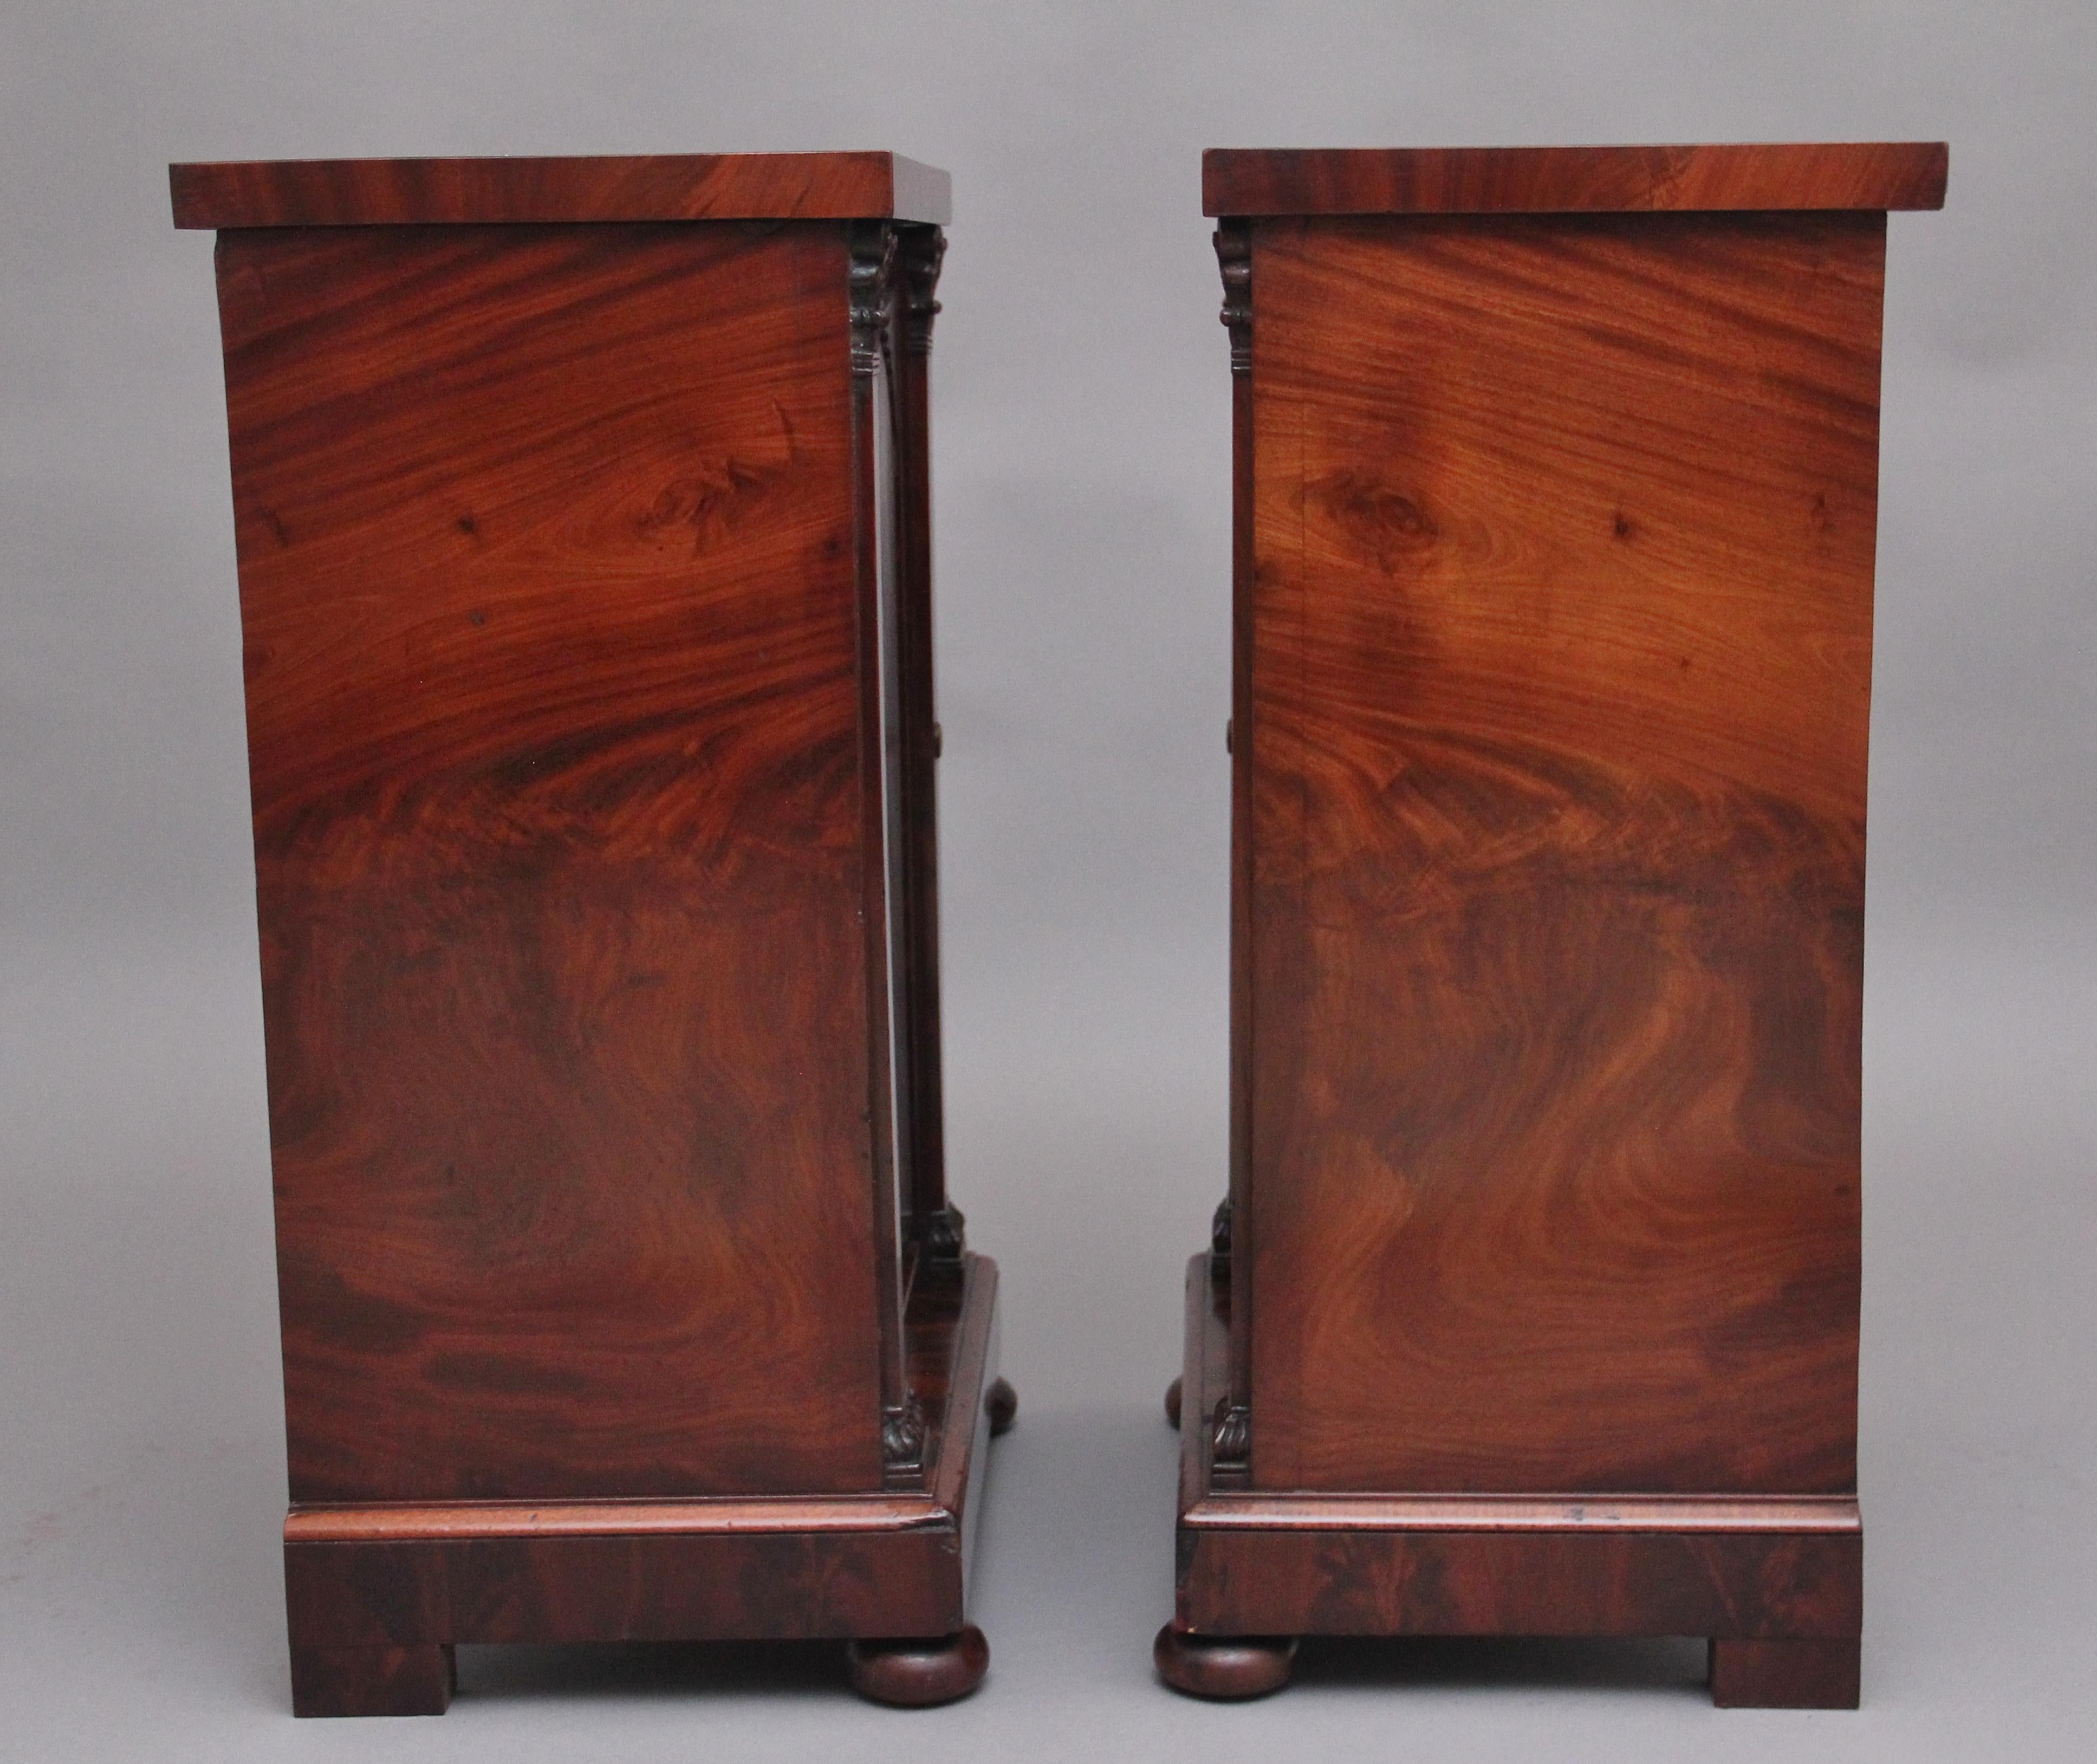 British Pair of 19th Century Flame Mahogany Bedside Cabinets For Sale